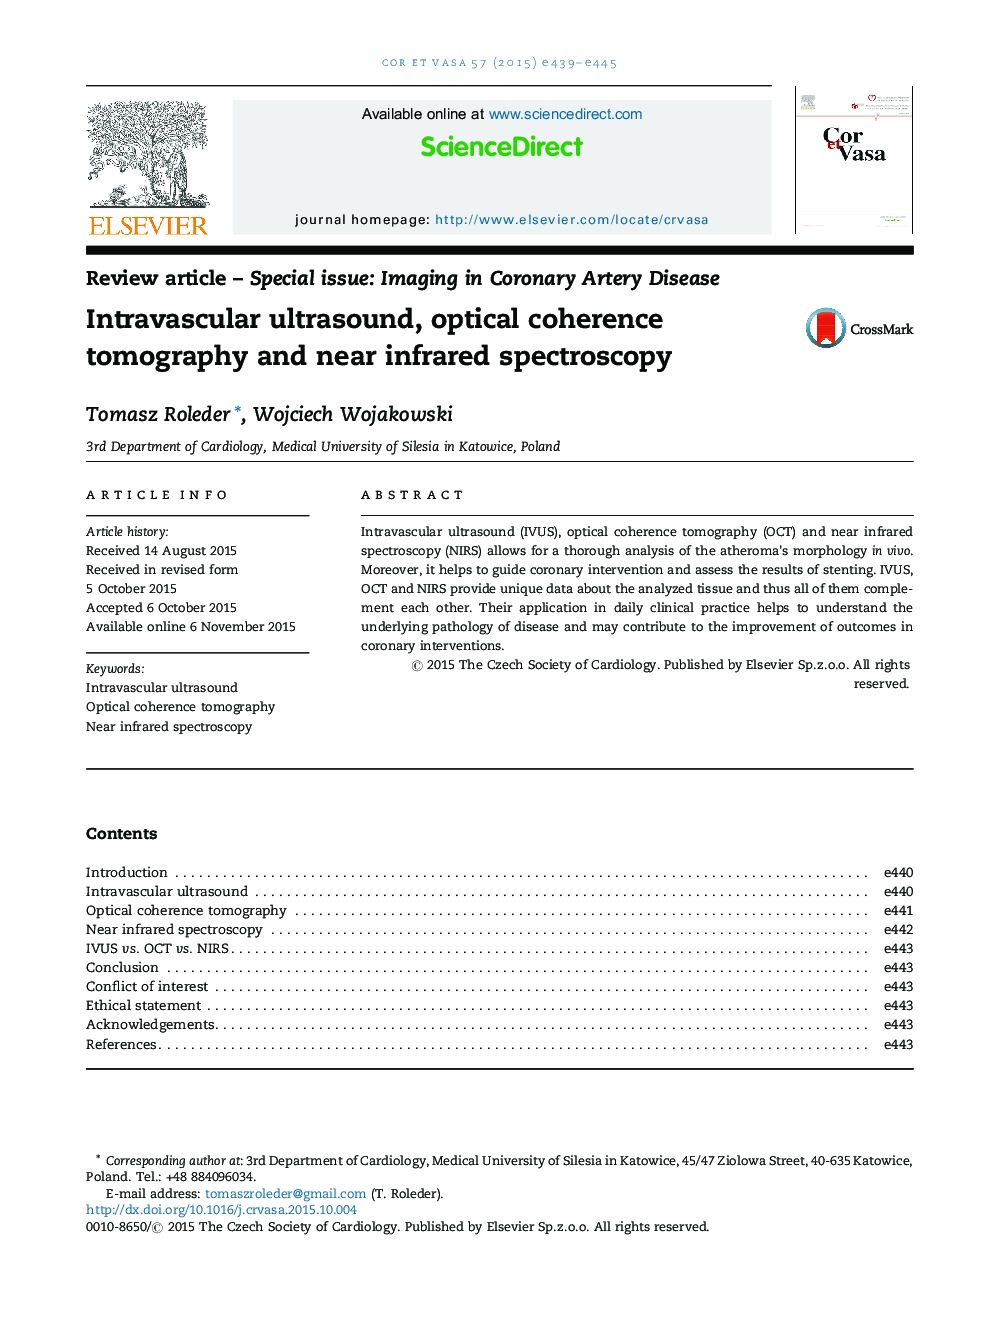 Intravascular ultrasound, optical coherence tomography and near infrared spectroscopy